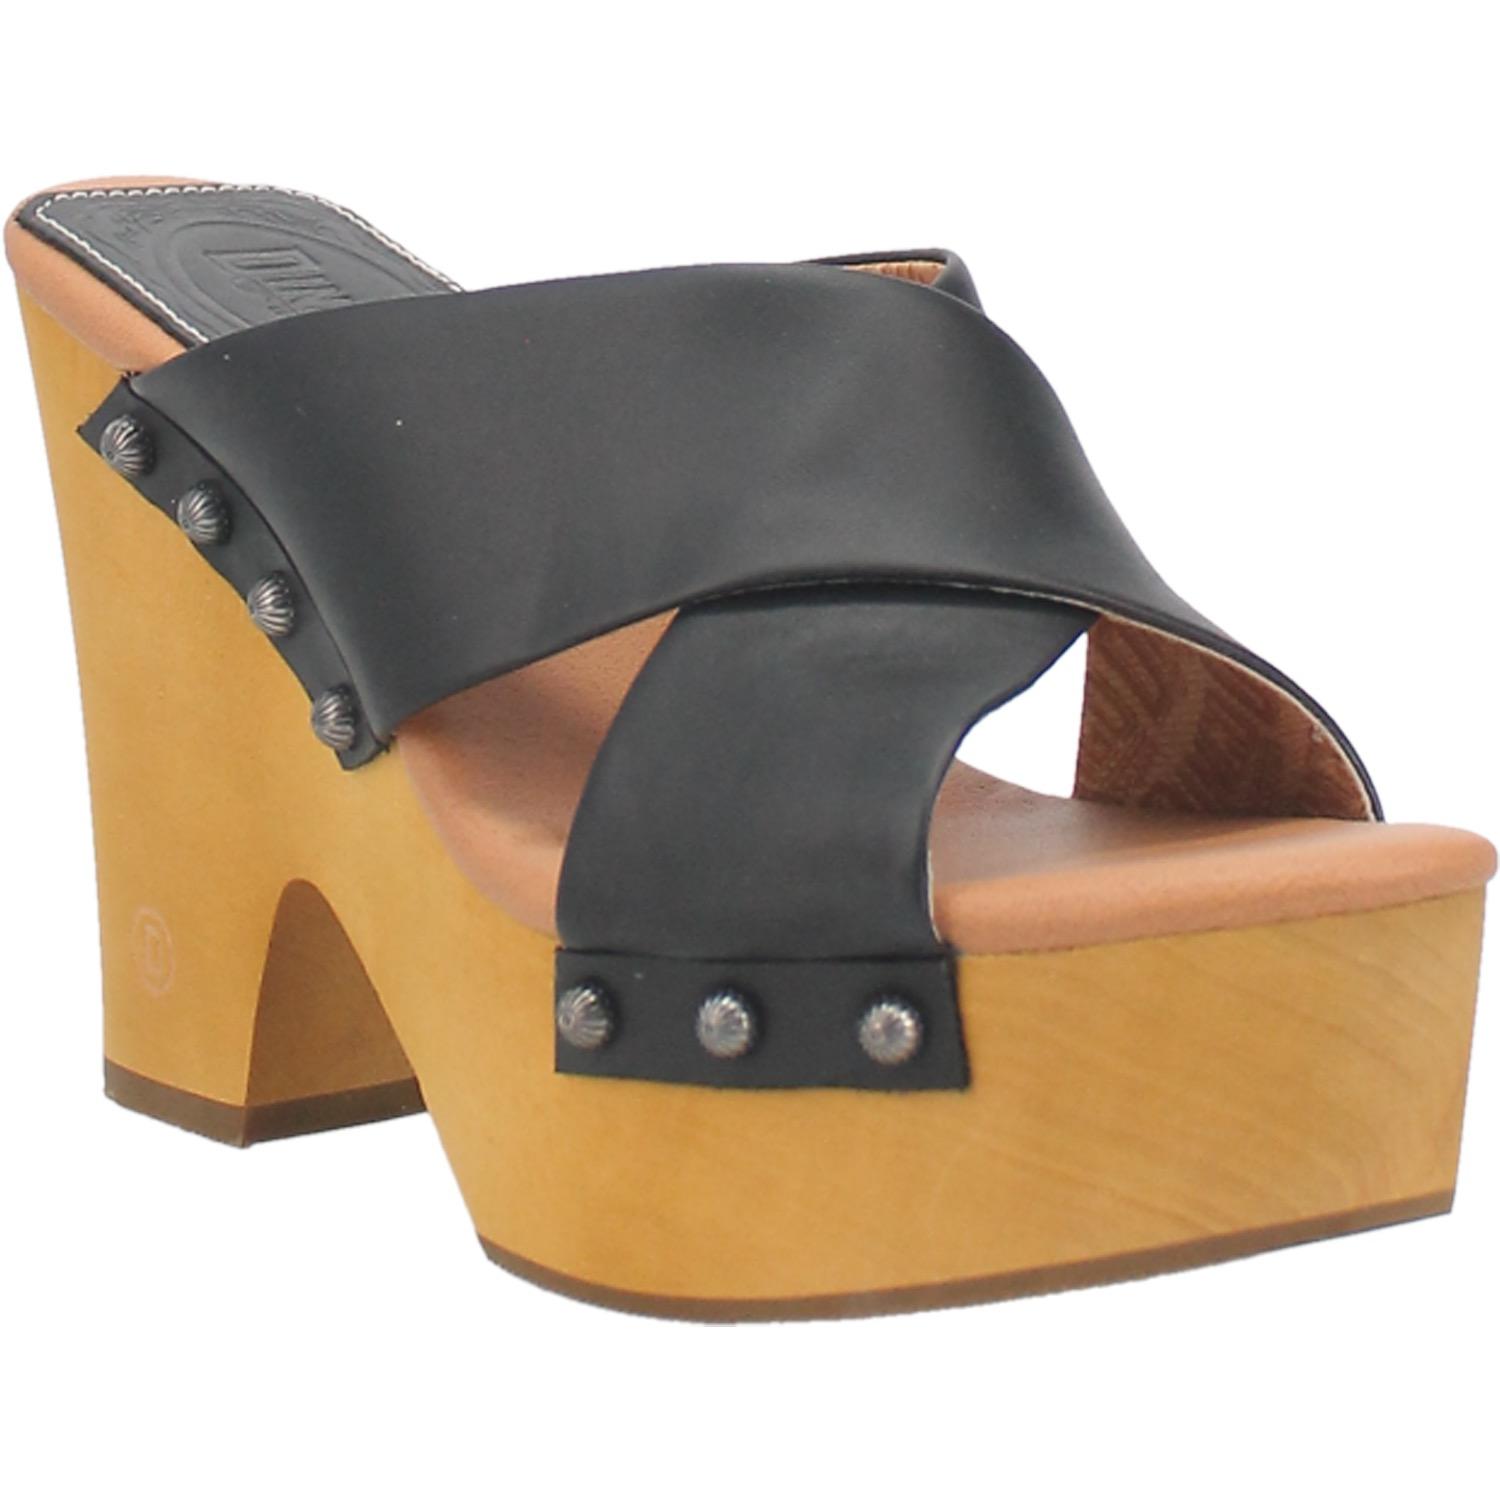 A chunky heeled sandal with two black crossed straps that are fastened in place with round studs. Item is pictured on a plain white background